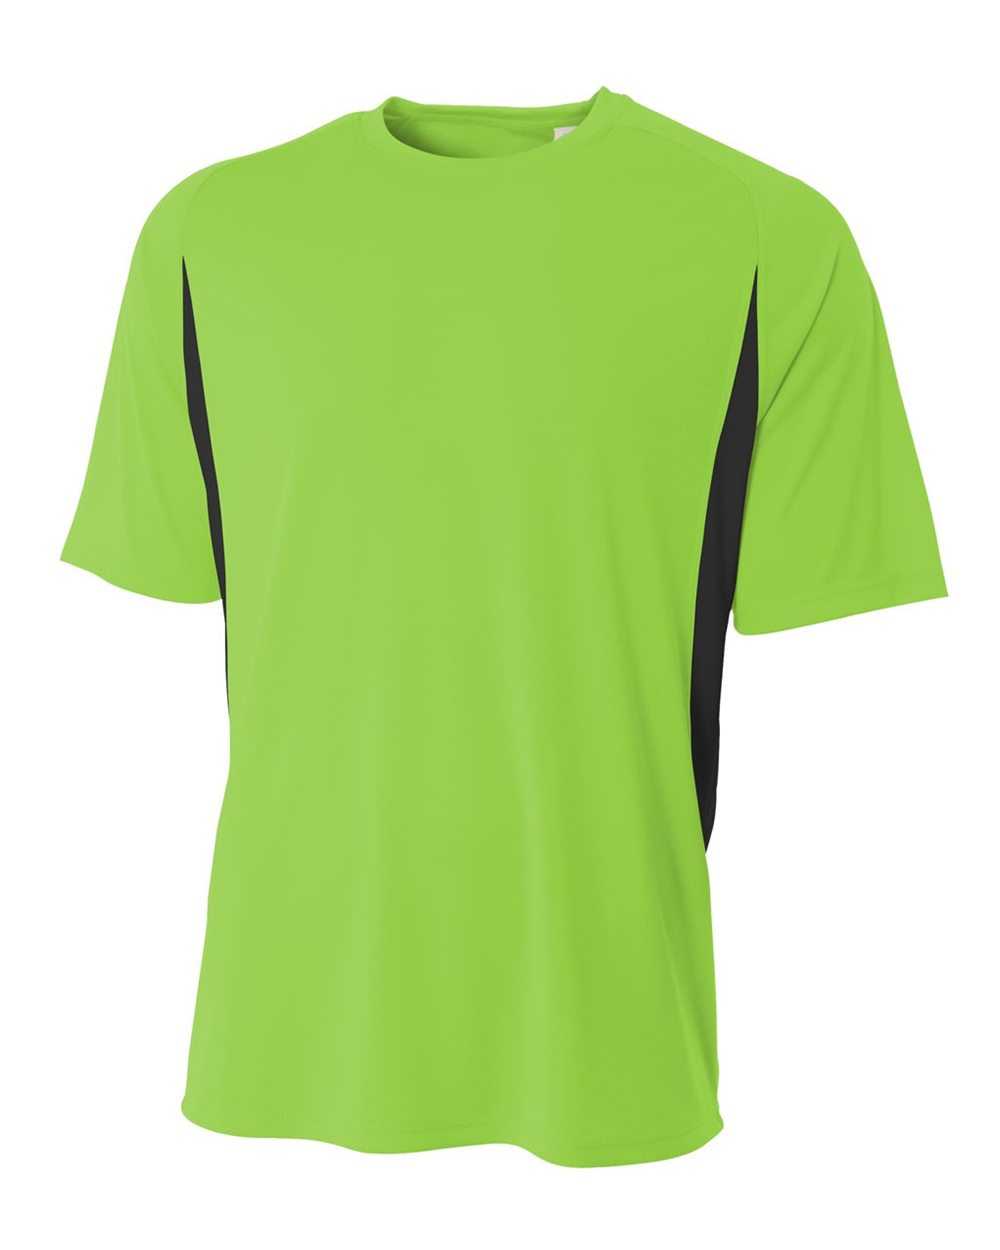 A4, A4 NB3181 Youth Cooling Performance Color Block Short Sleeve Crew - Lime Black